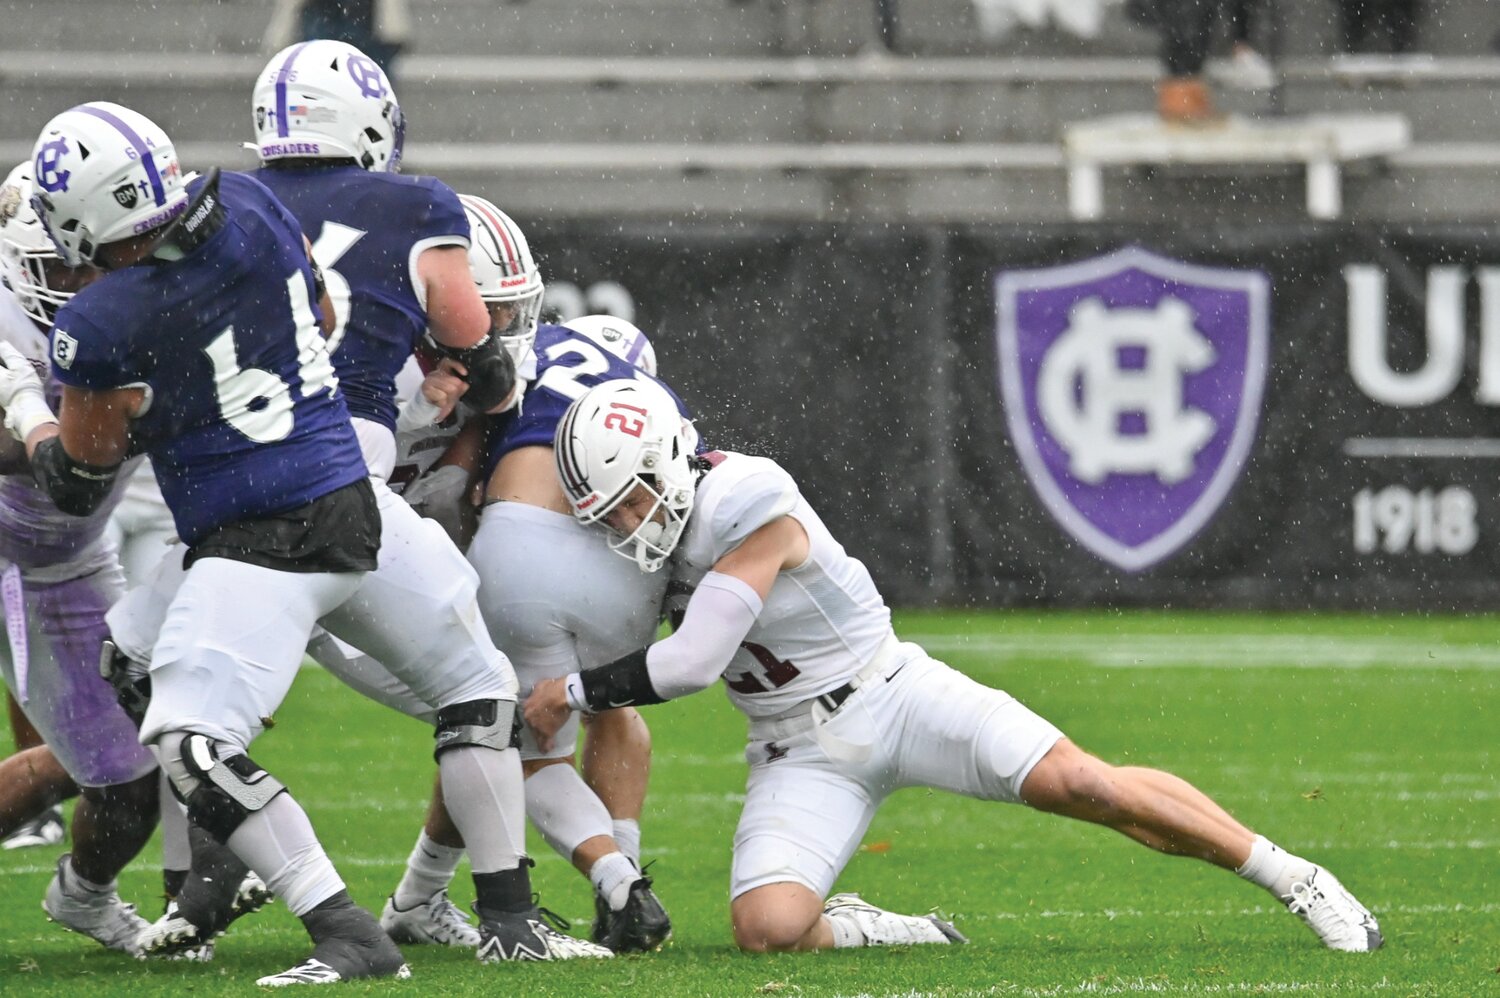 Lafayette’s Billy Shaeffer (No. 21), was named a finalist for the Buck Buchanan Award, given to the top Defensive Player in FCS, in late November.